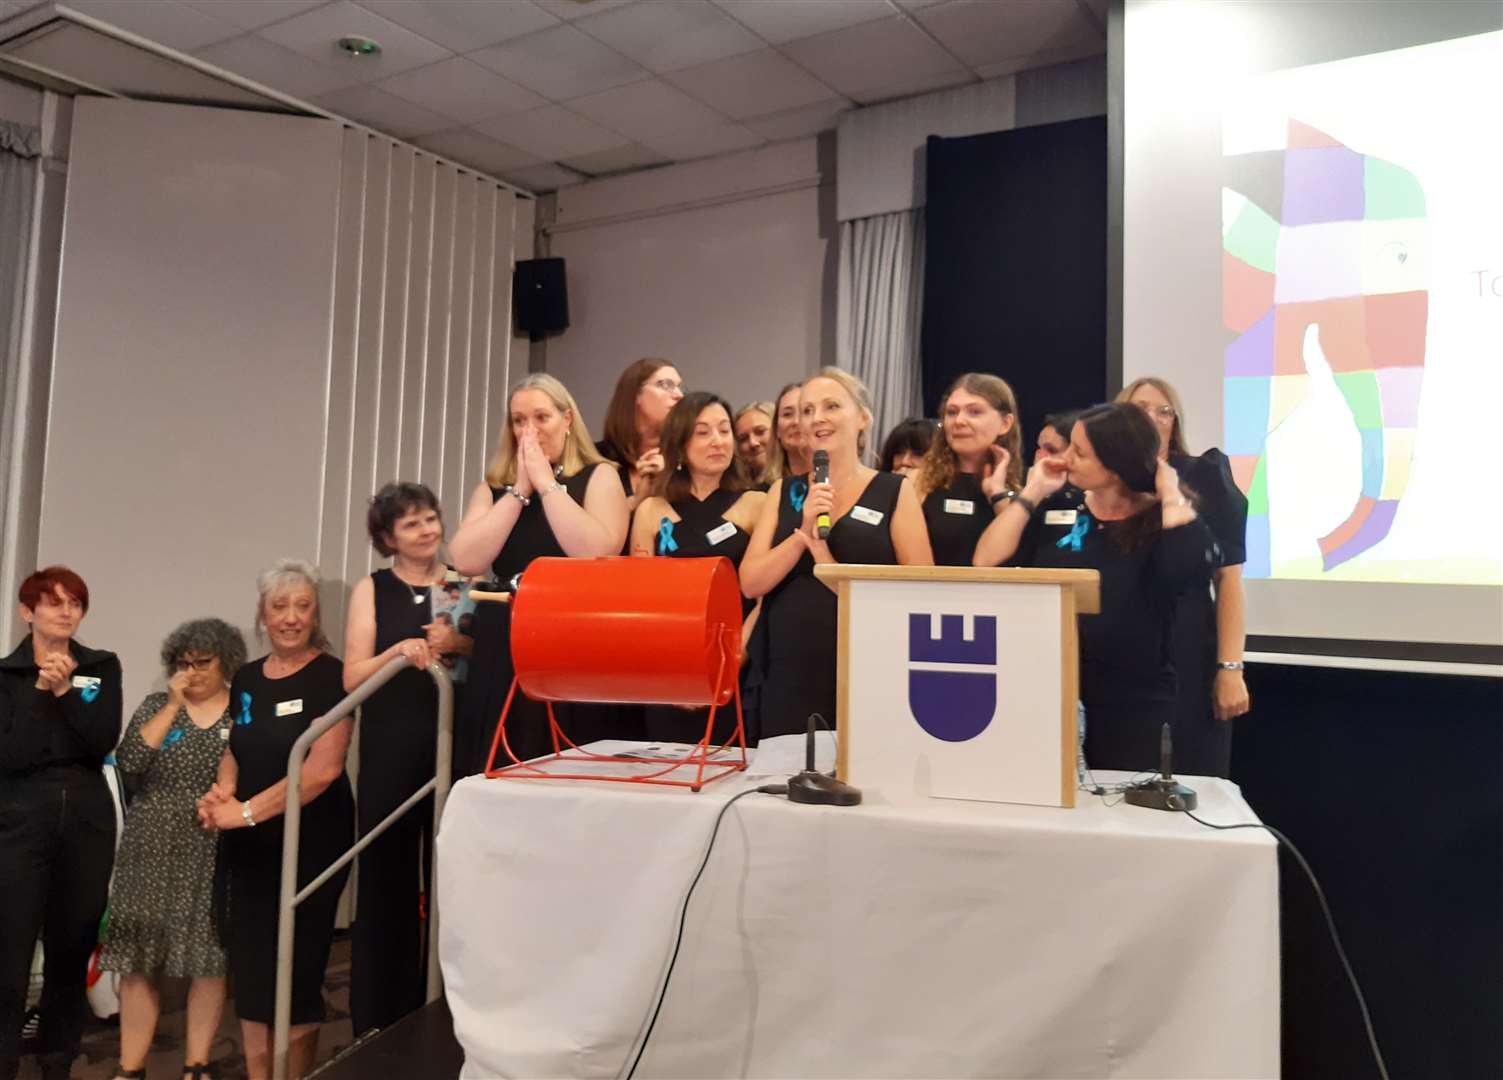 The hospice team find out more than £300,000 was raised